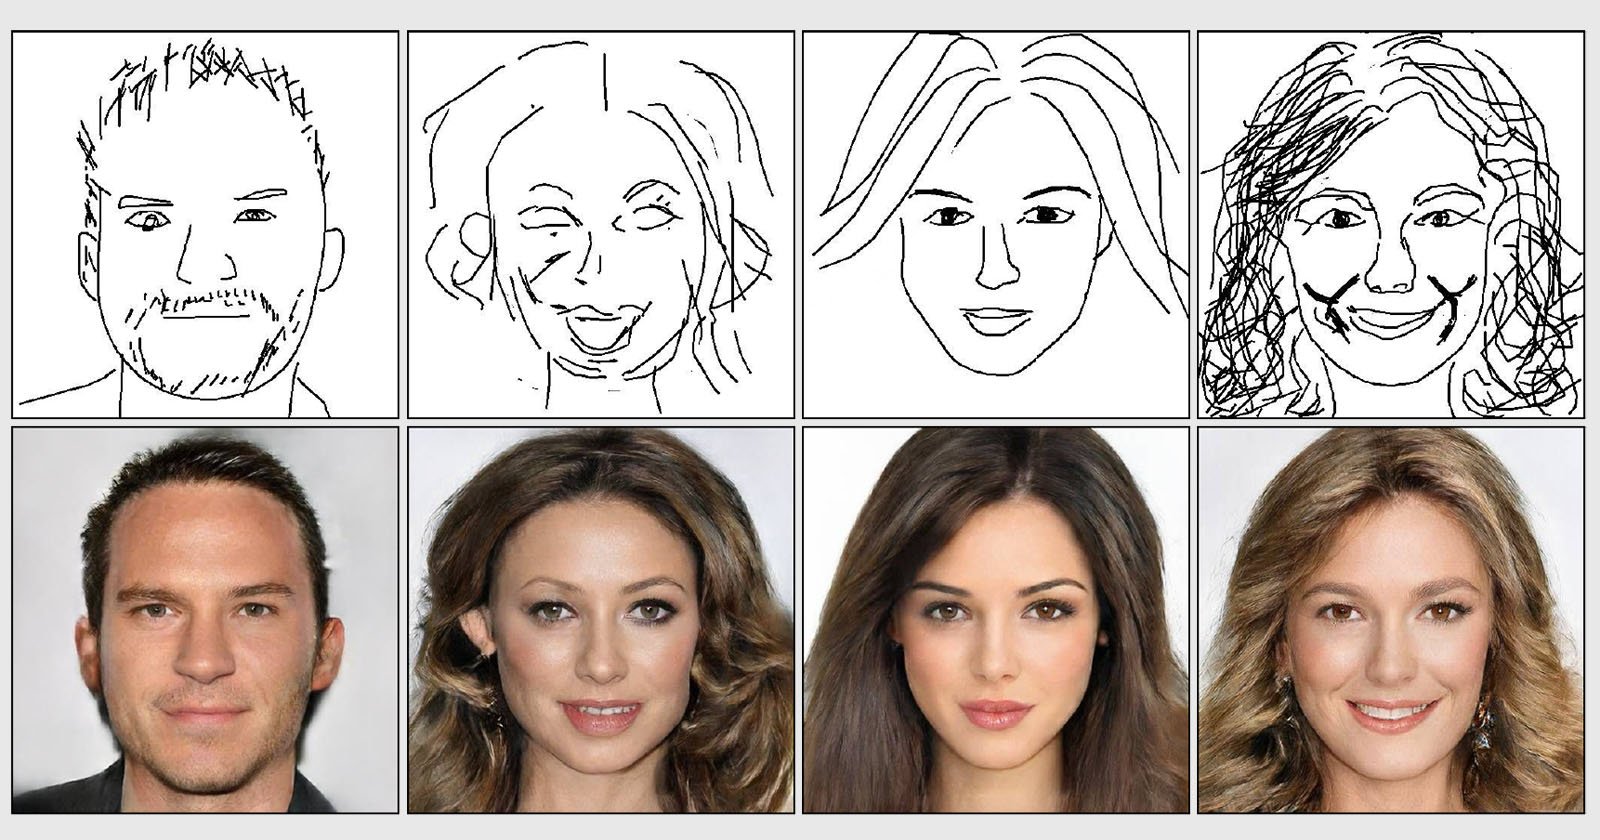 This 'DeepFaceDrawing' AI Turns Simple Sketches Into Portrait Photos | PetaPixel